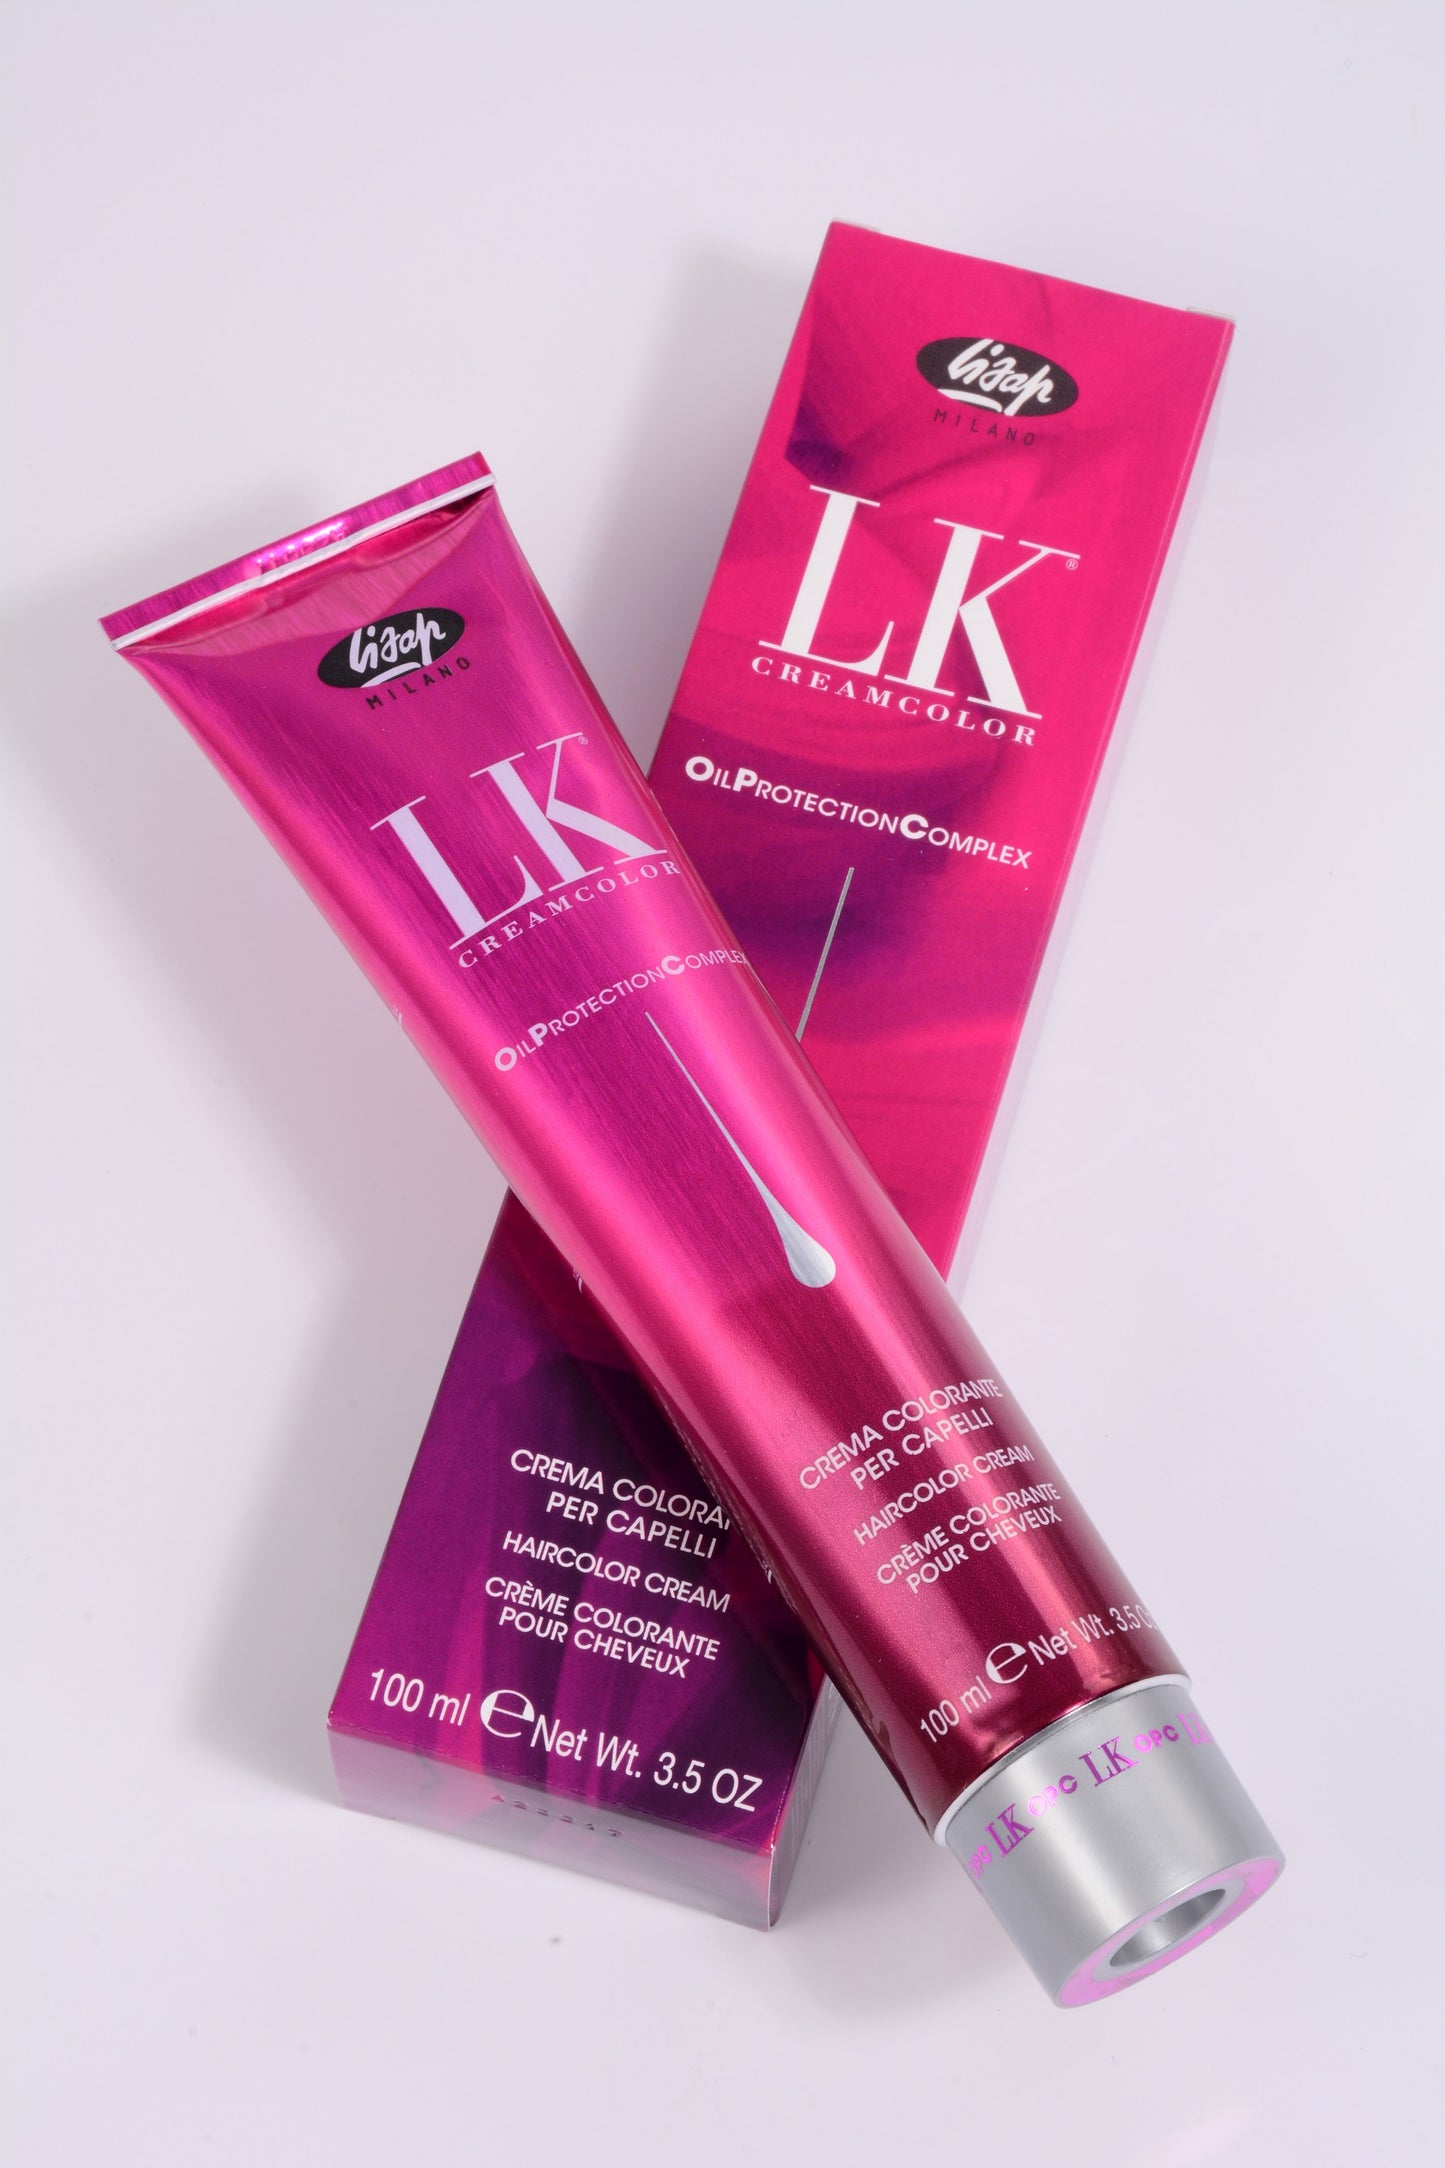 LK Creamcolor 7/60 Oil Protection Complex